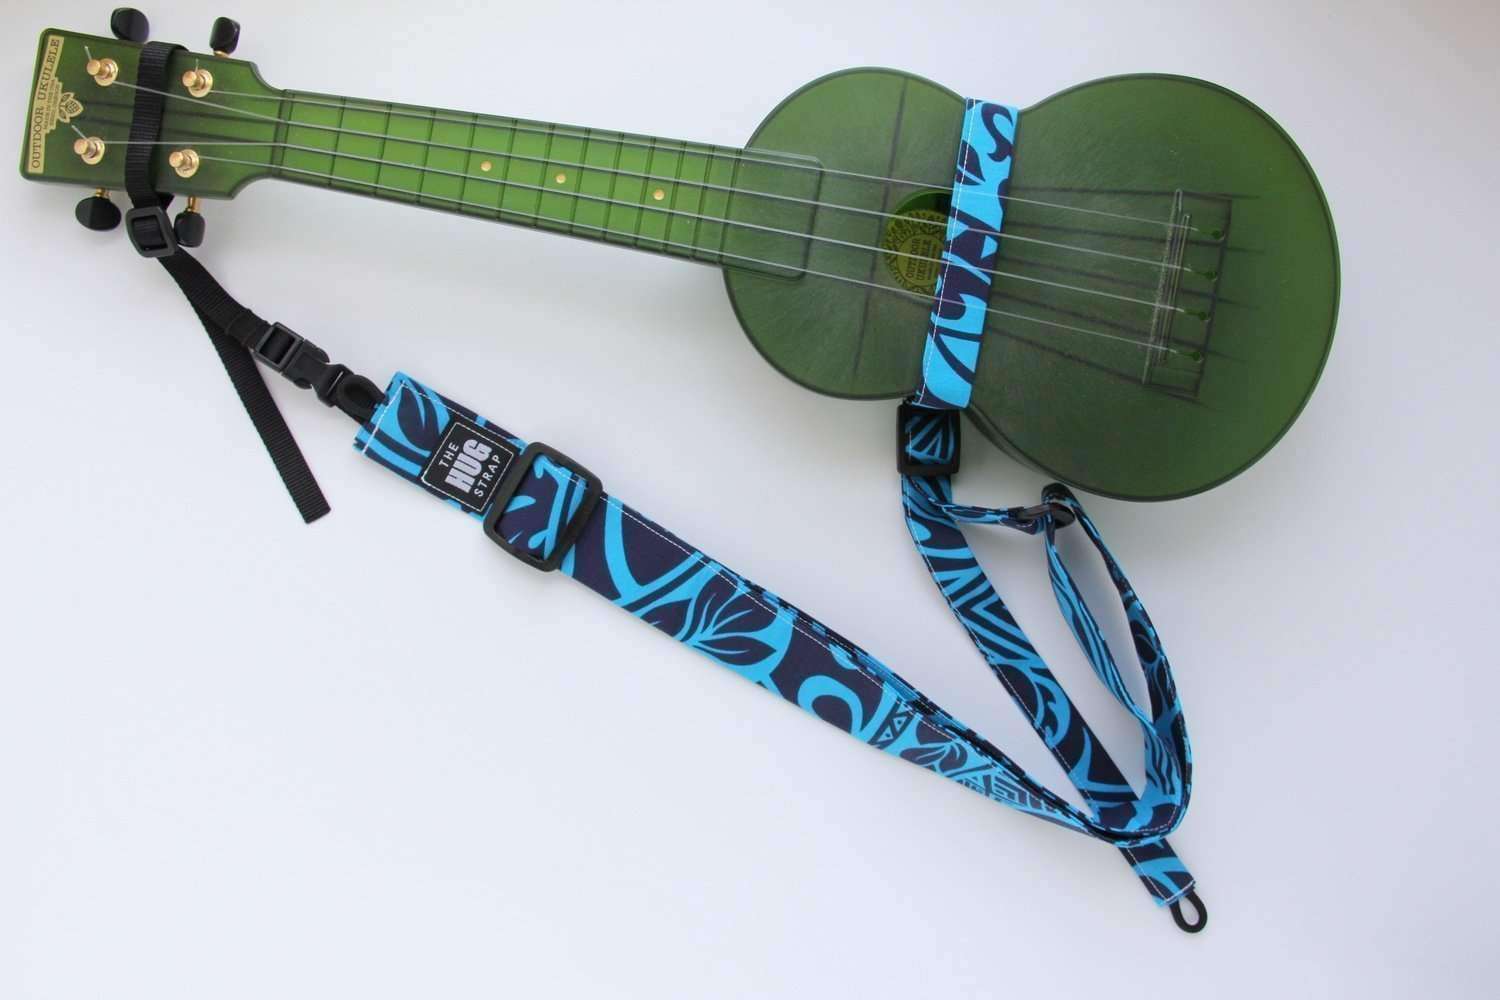 Ukulele Strap ALL in ONE Hug - Dogs on Turquoise - The Hug Strap for Ukulele | Handmade Ukulele Strap - The Hug Strap®